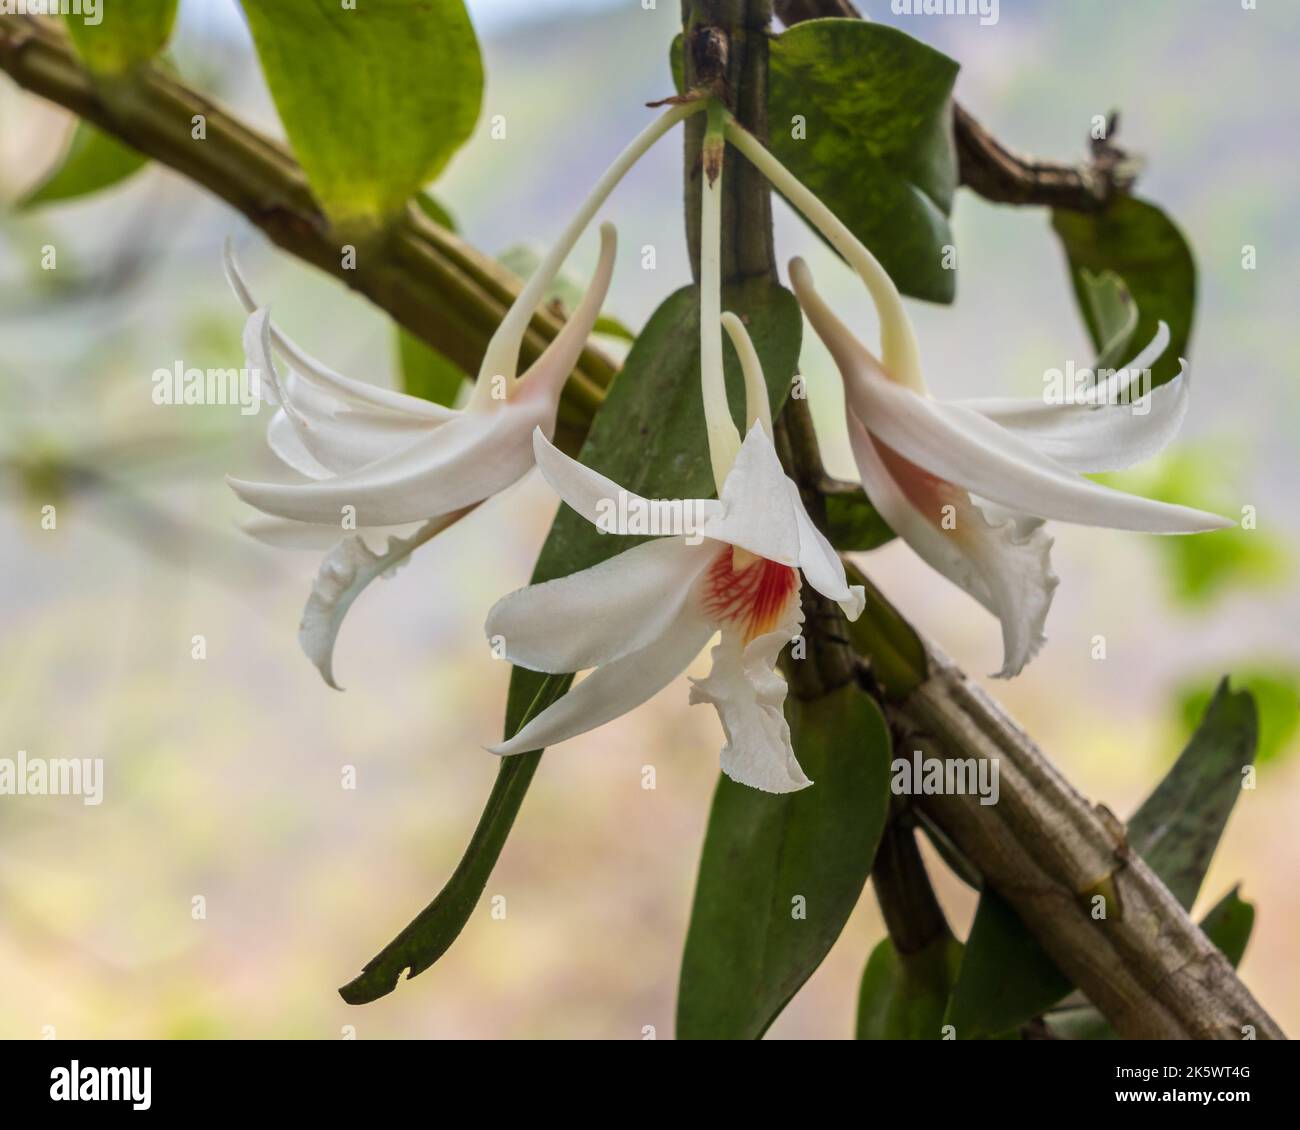 Closeup view of beautiful white and orange flowers of dendrobium draconis a tropical epiphytic orchid species blooming outdoors on natural background Stock Photo